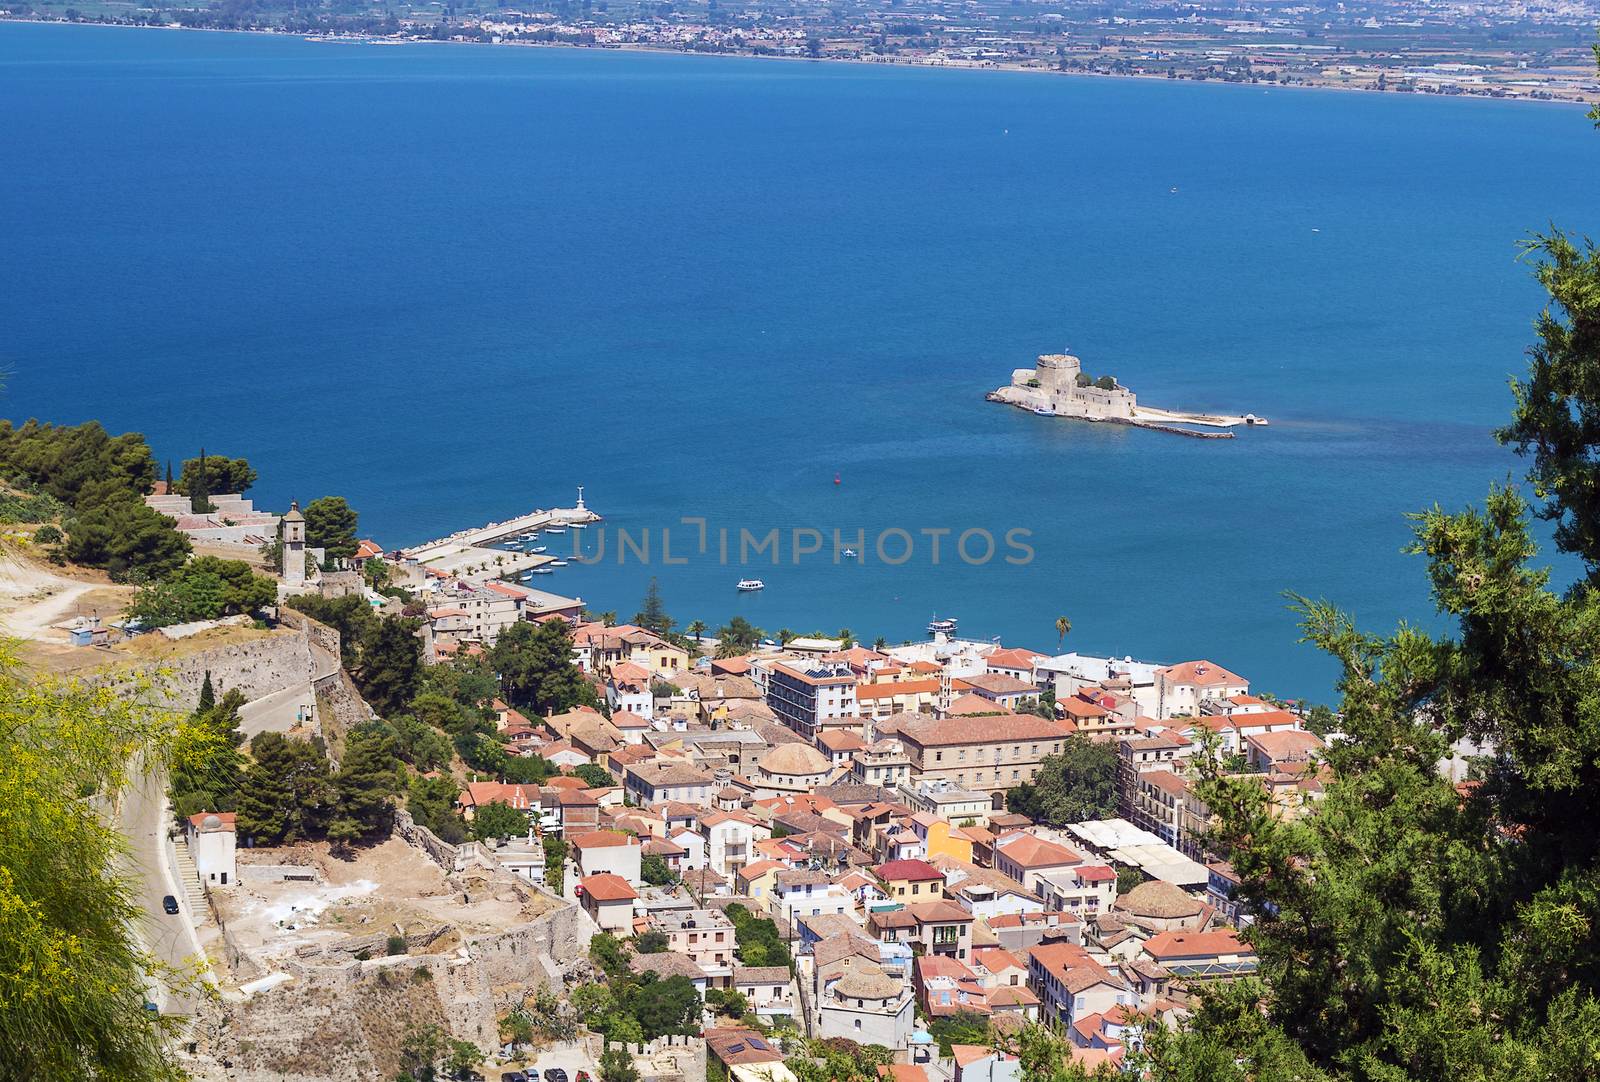 View of the old part of the city of Nafplio from Palamidi castle, Greece